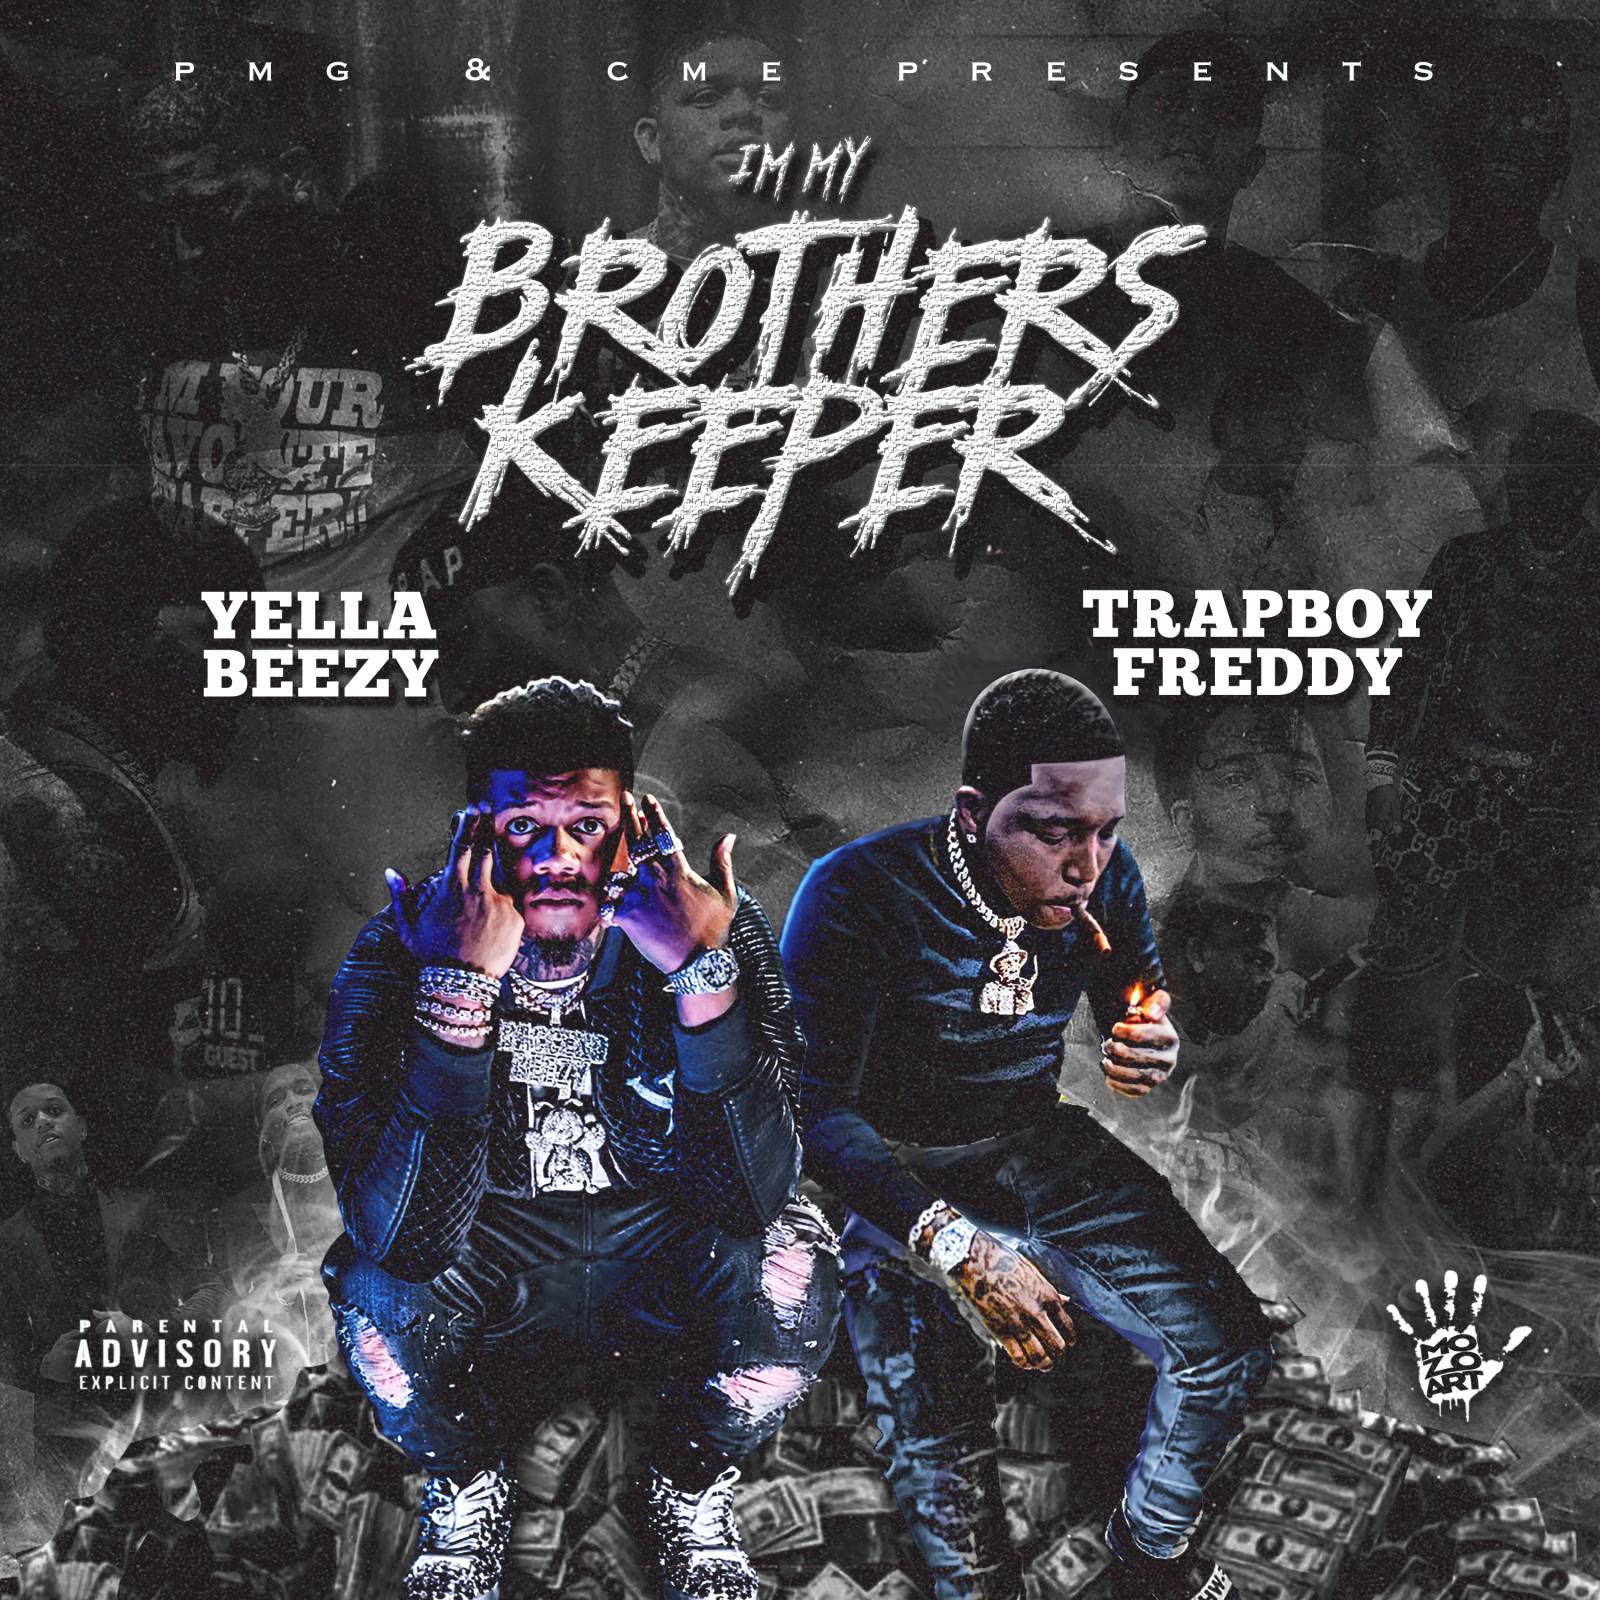 Yella Beezy Teams With Trapboy Freddy For 'I'm My Brother's Keeper' Mixtape